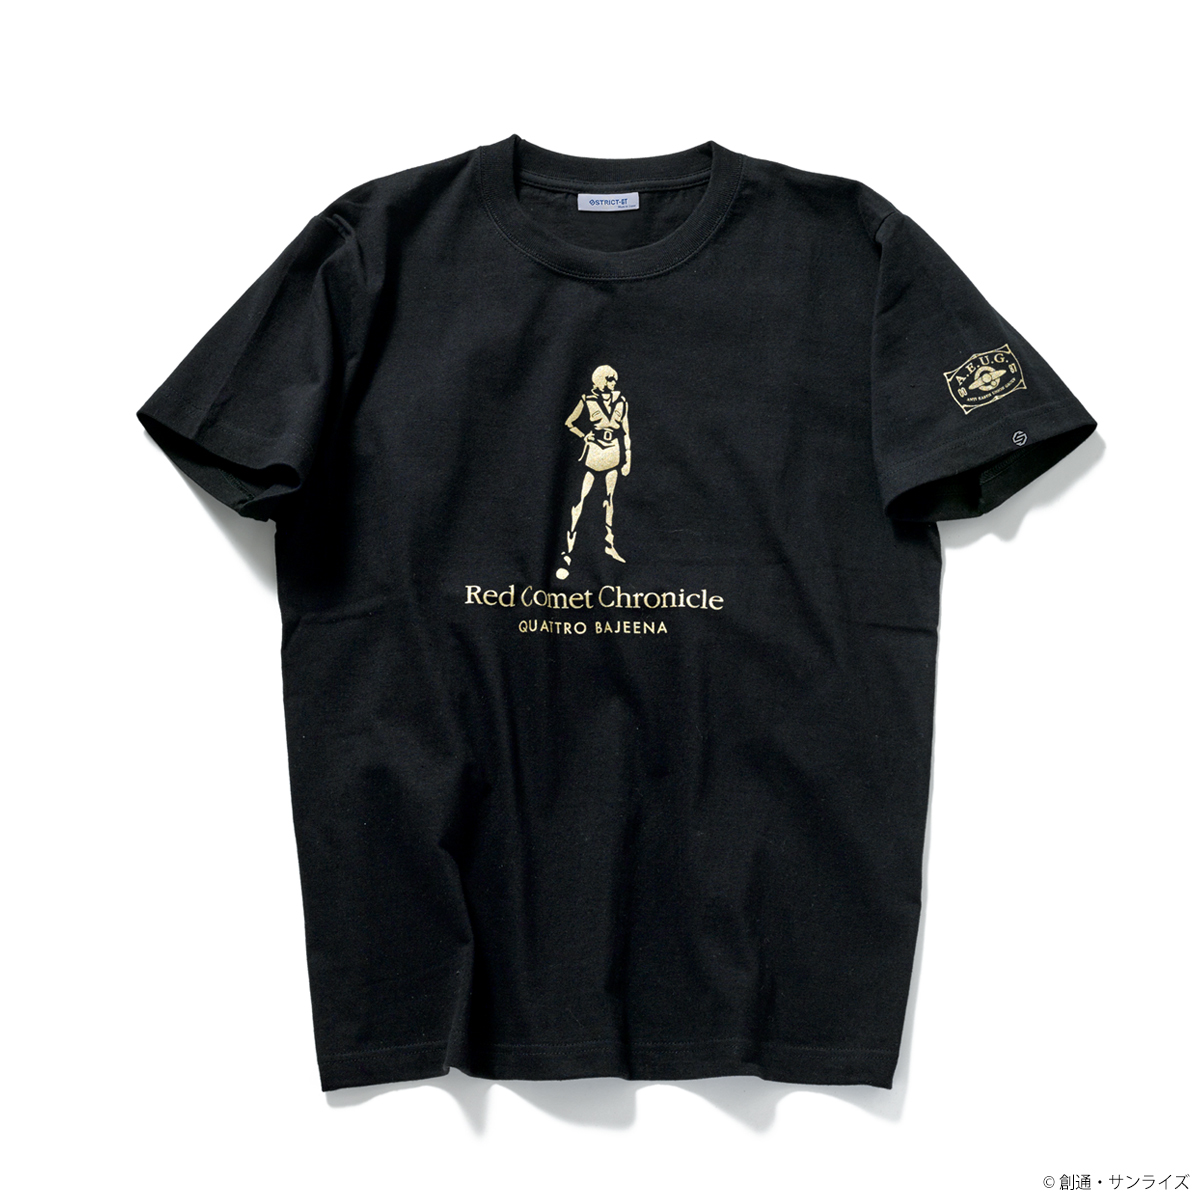 STRICT-G『機動戦士Zガンダム』Red Comet Chronicle Tシャツ クワトロ・バジーナ